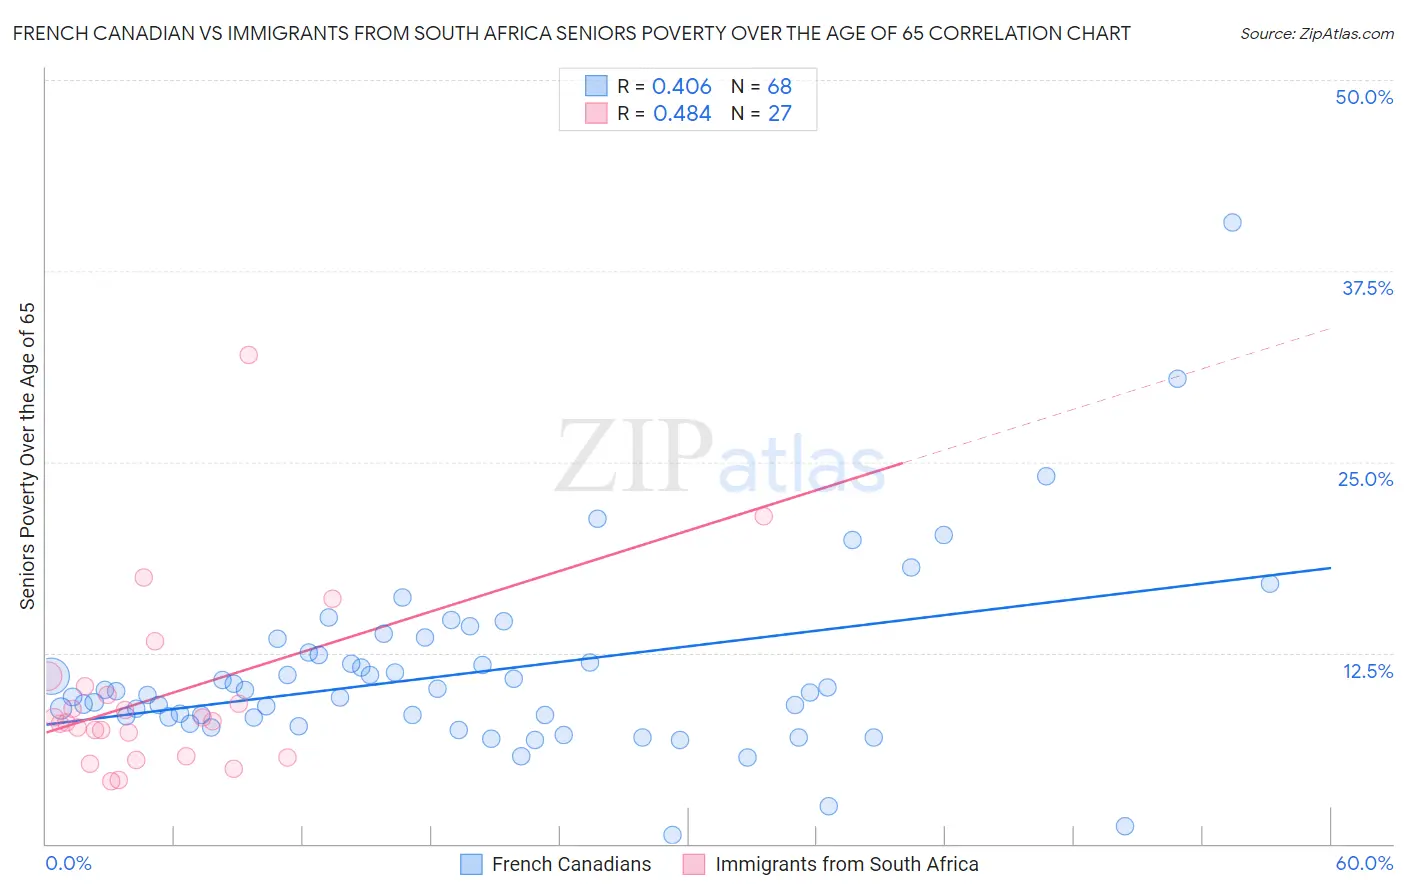 French Canadian vs Immigrants from South Africa Seniors Poverty Over the Age of 65